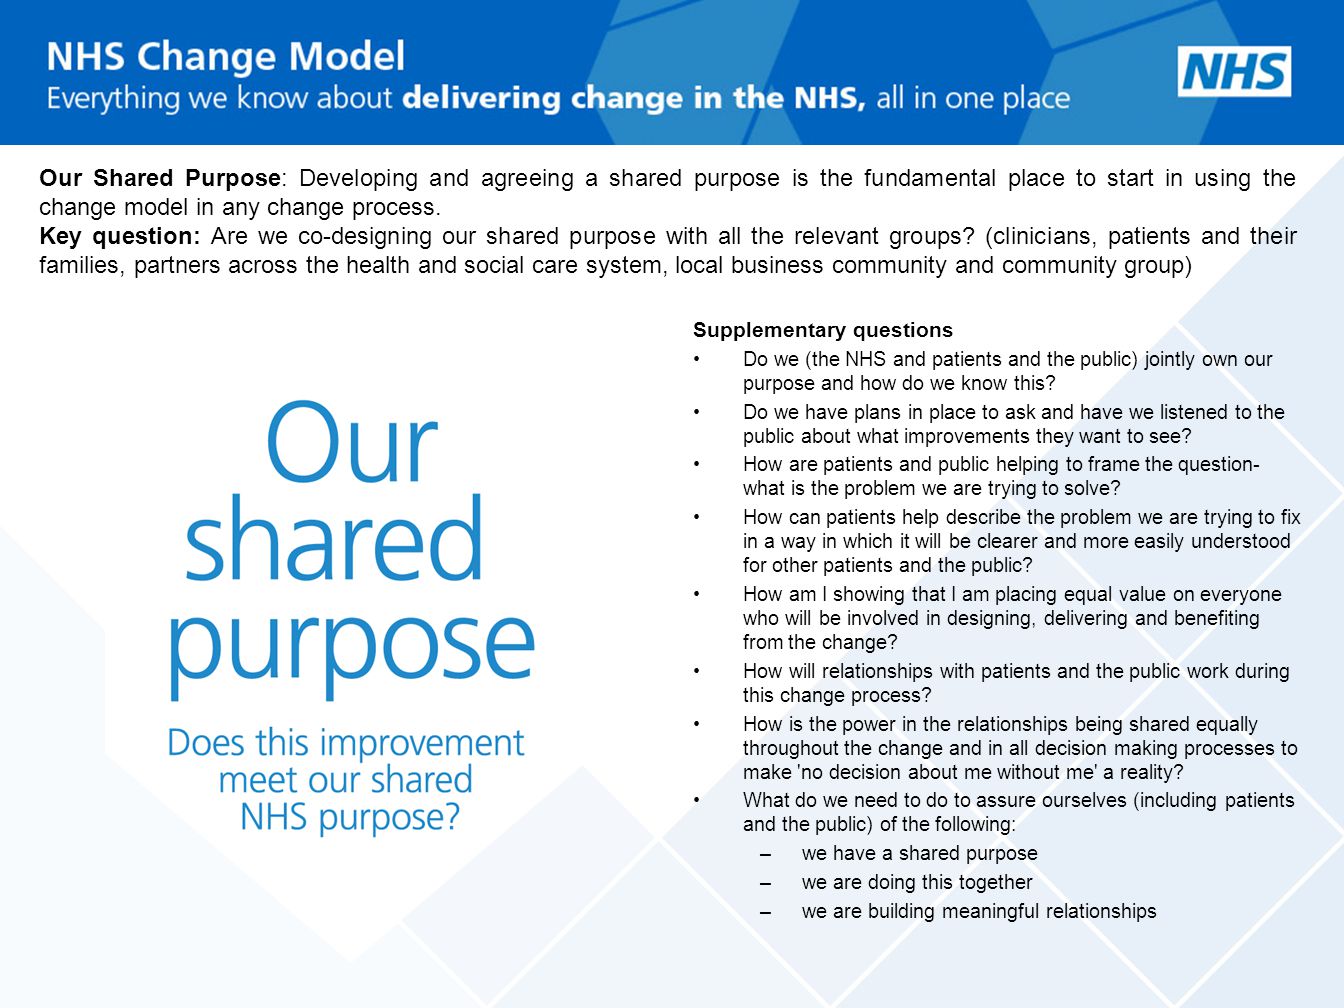 Our Shared Purpose: Developing and agreeing a shared purpose is the fundamental place to start in using the change model in any change process.